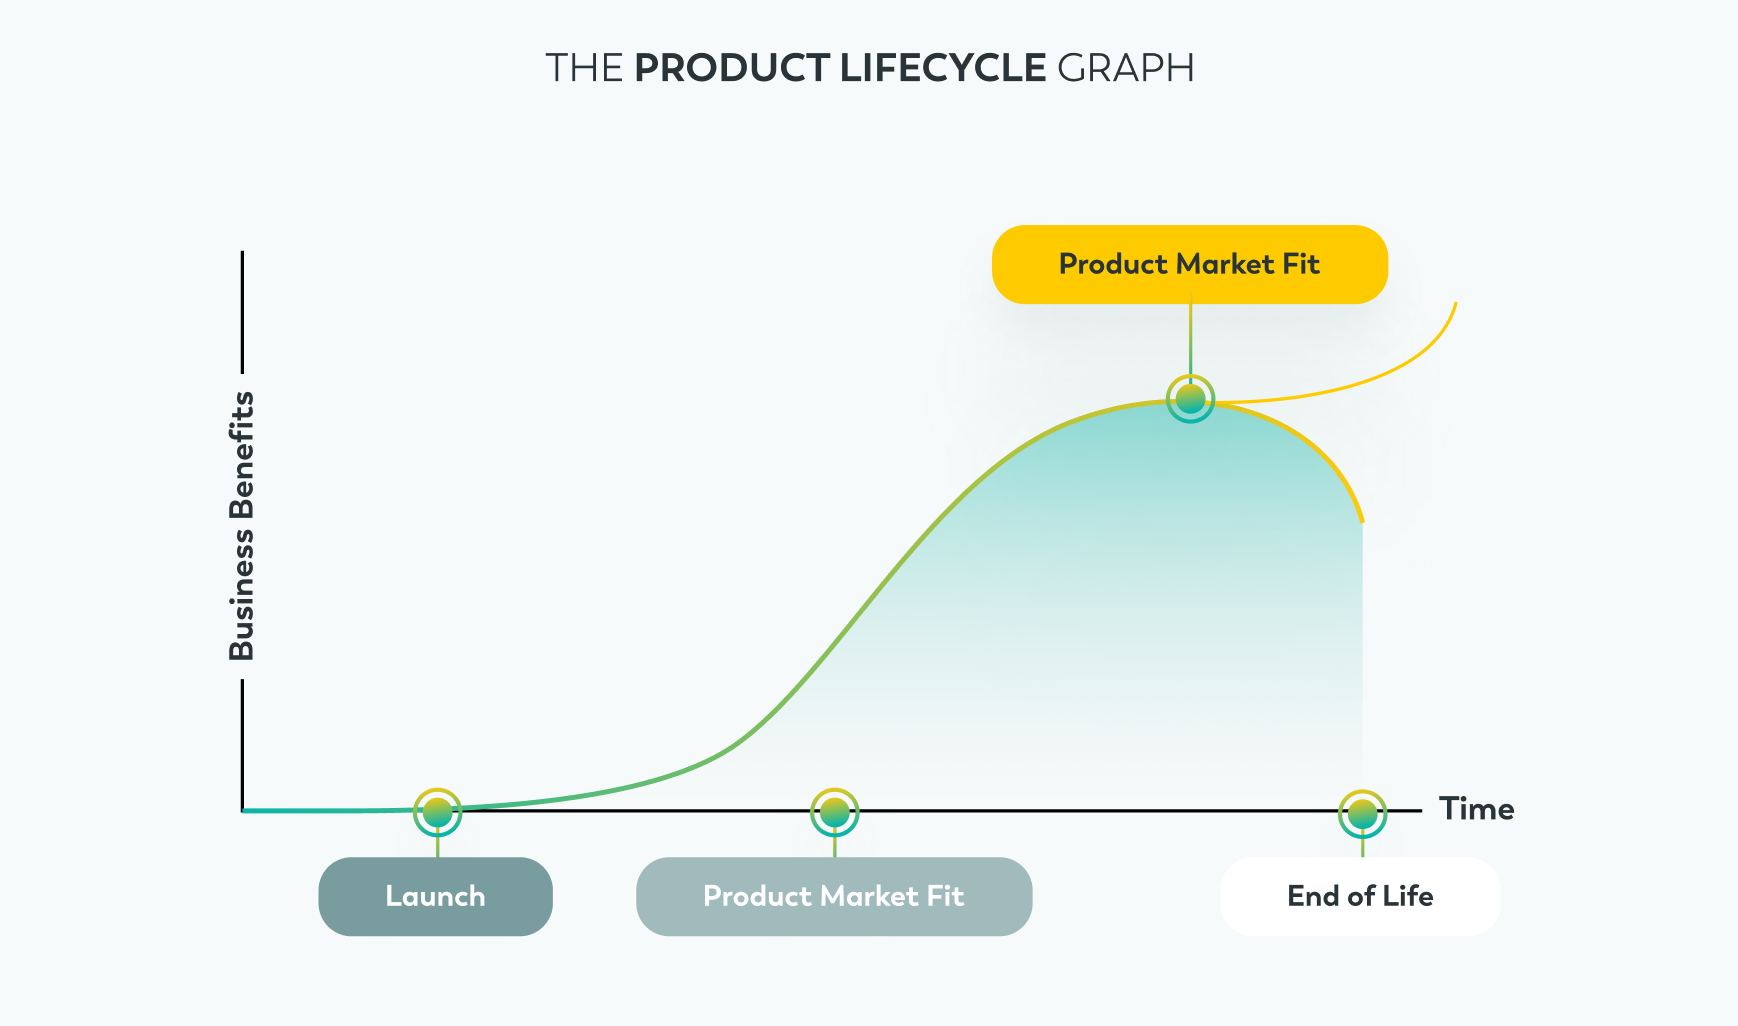 The product lifecycle graph